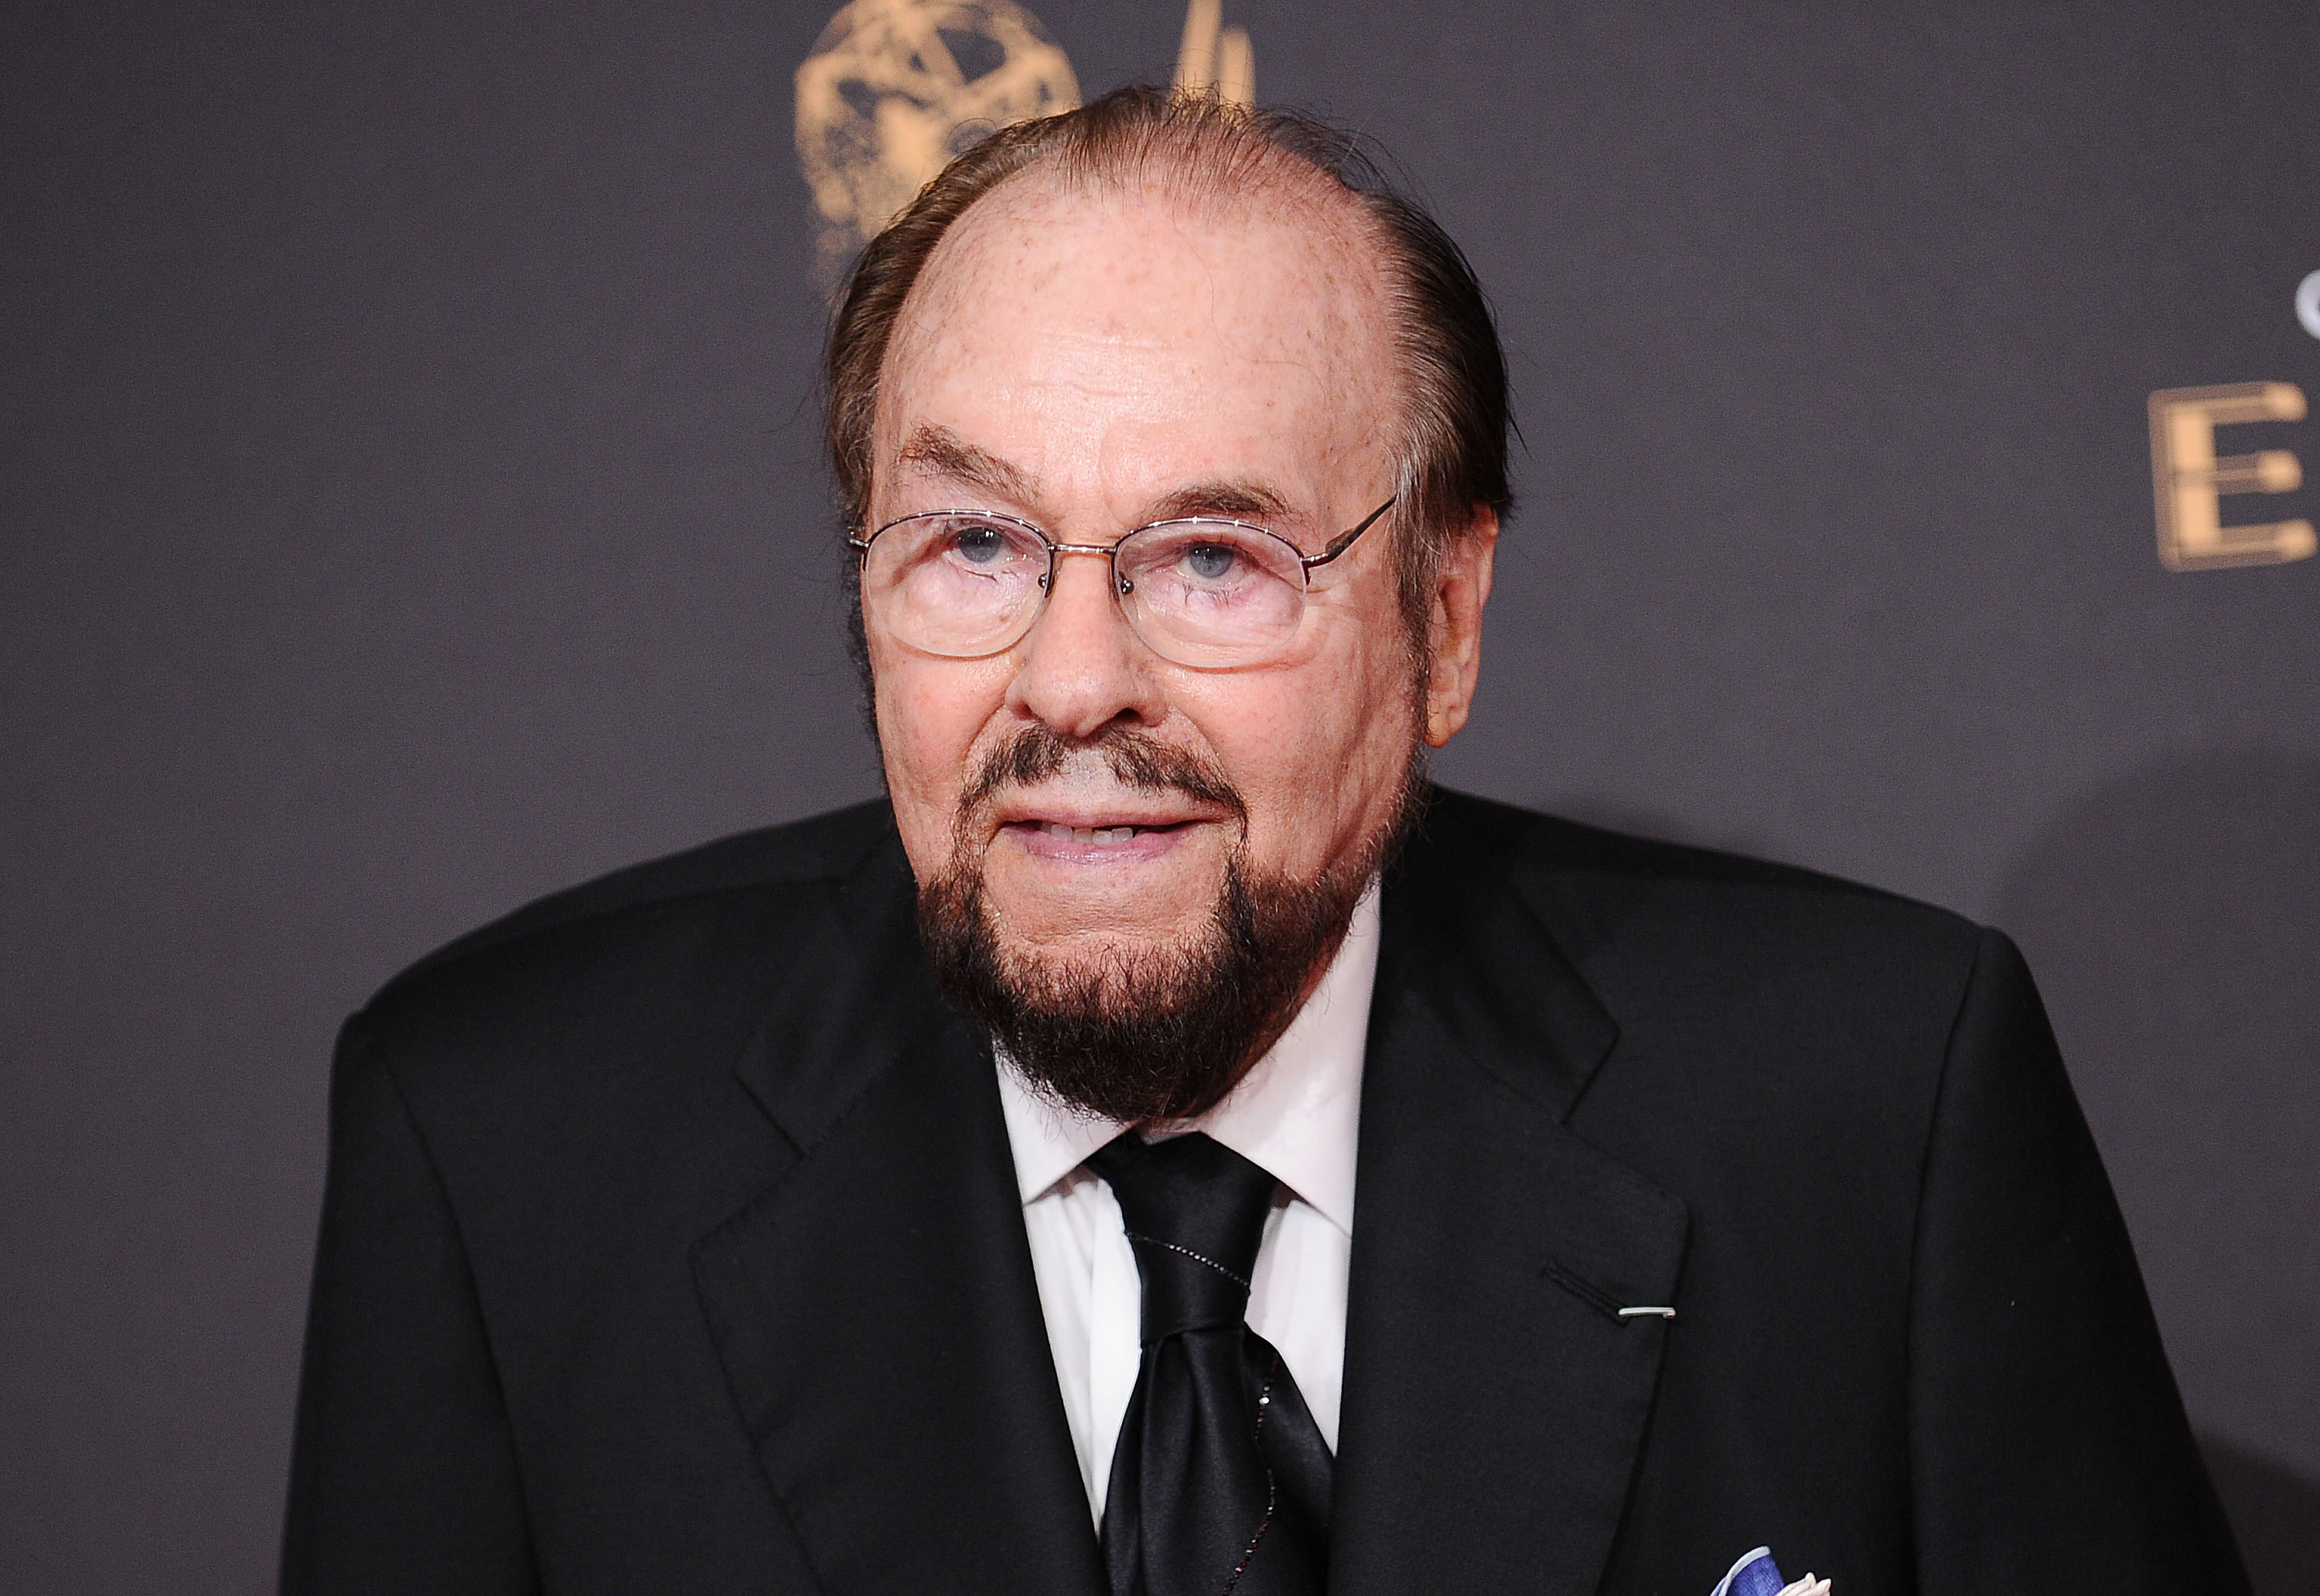 James Lipton at the Creative Arts Emmy Awards on September 9, 2017, in Los Angeles, California | Photo: Jason LaVeris/FilmMagic/Getty Images